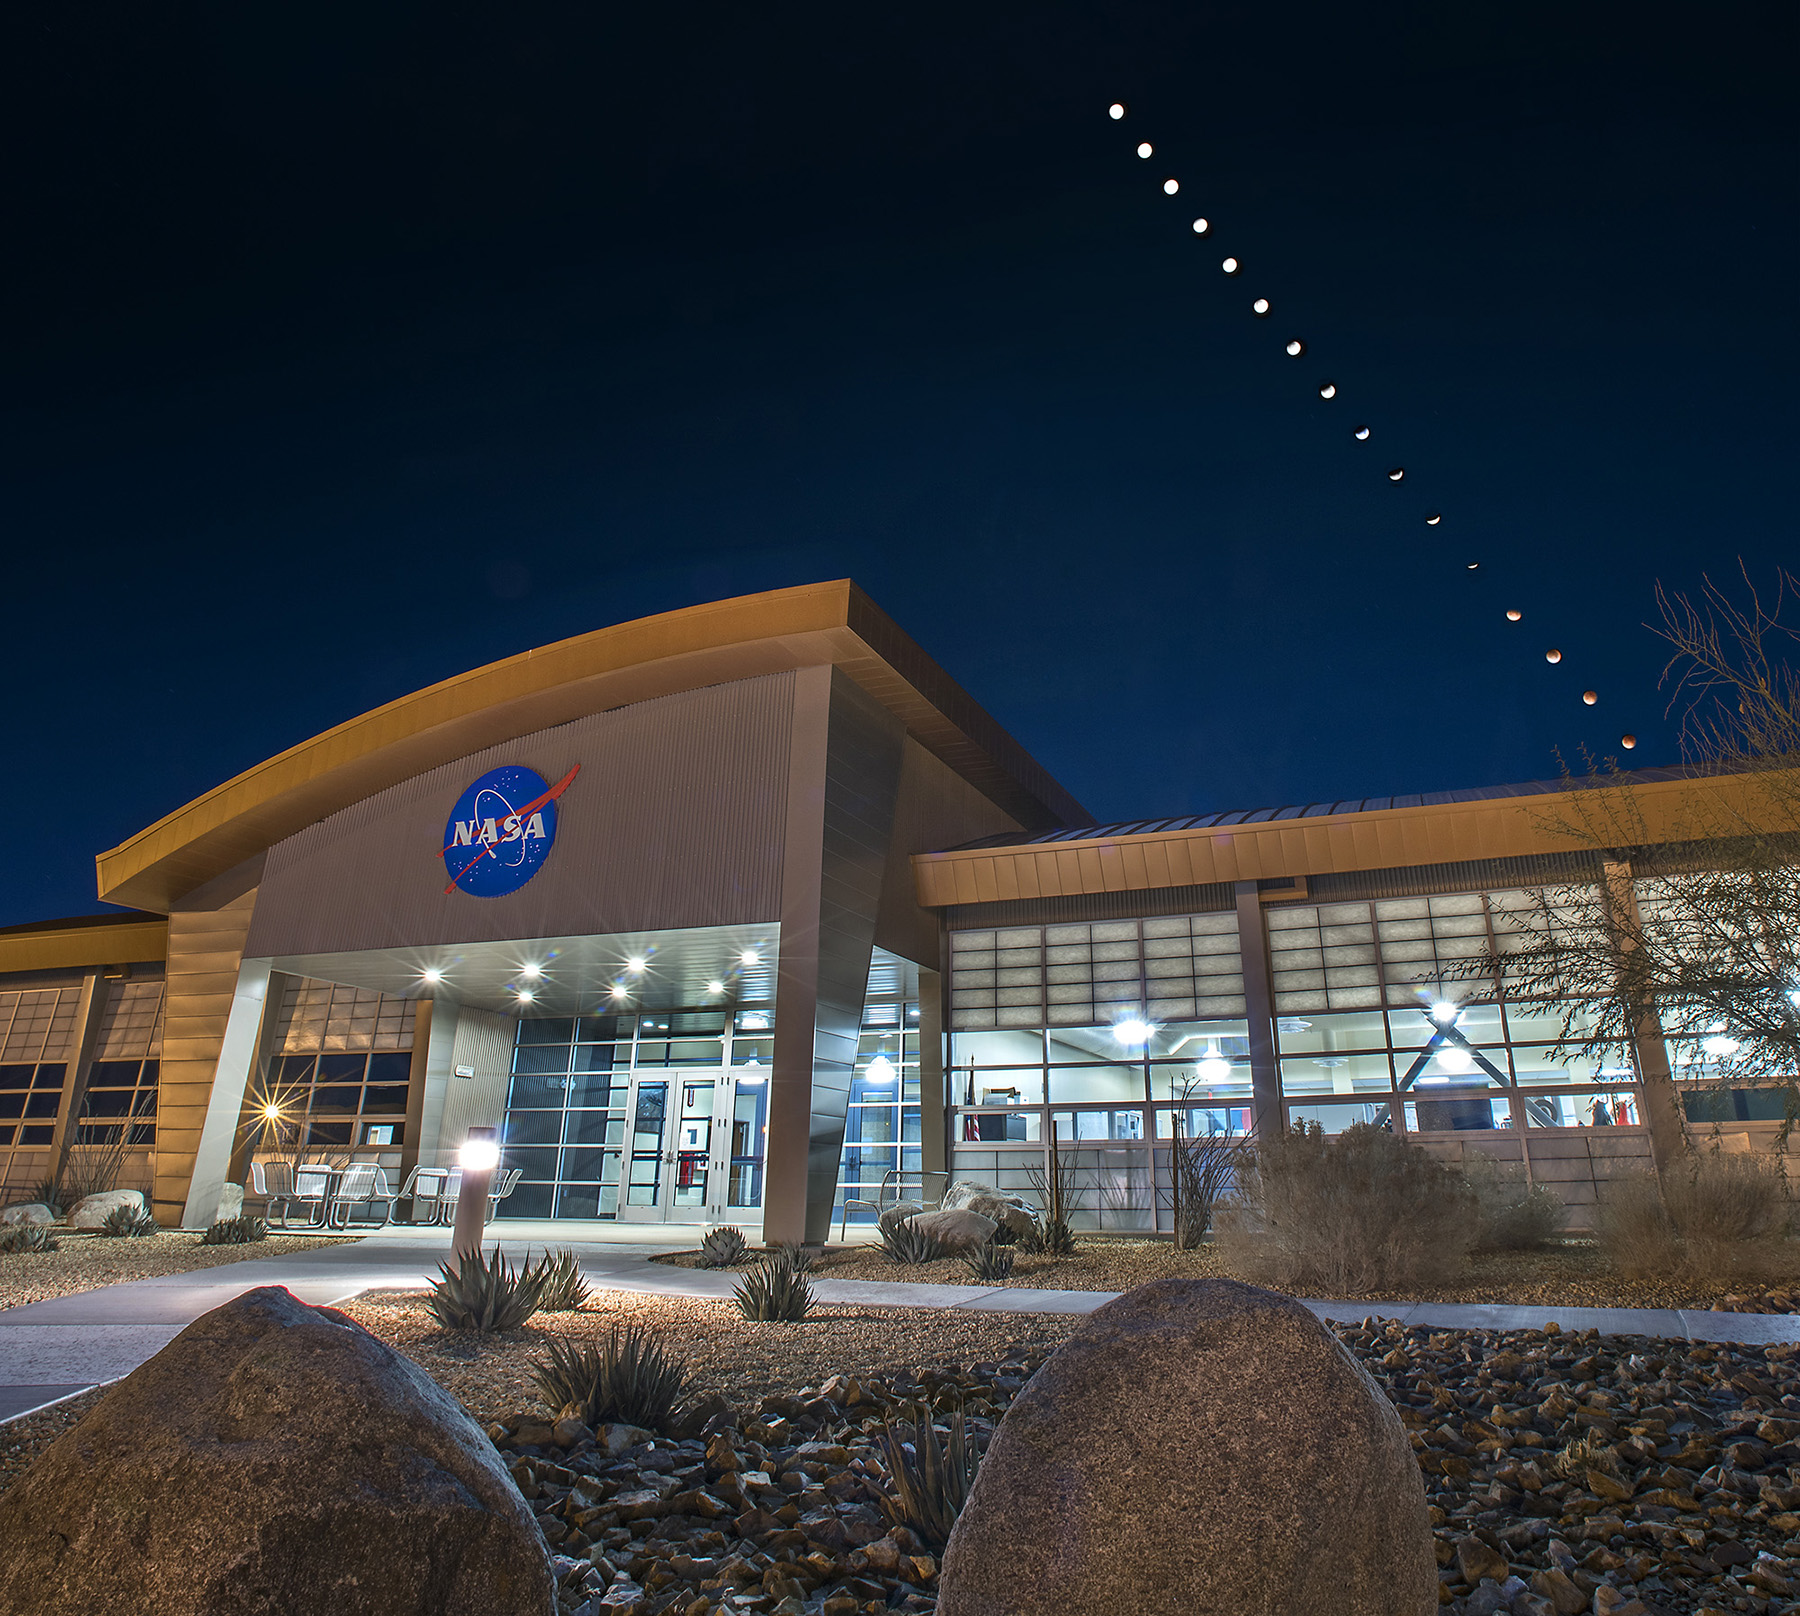 A long-exposure photo shows the phases of the moon over a NASA building